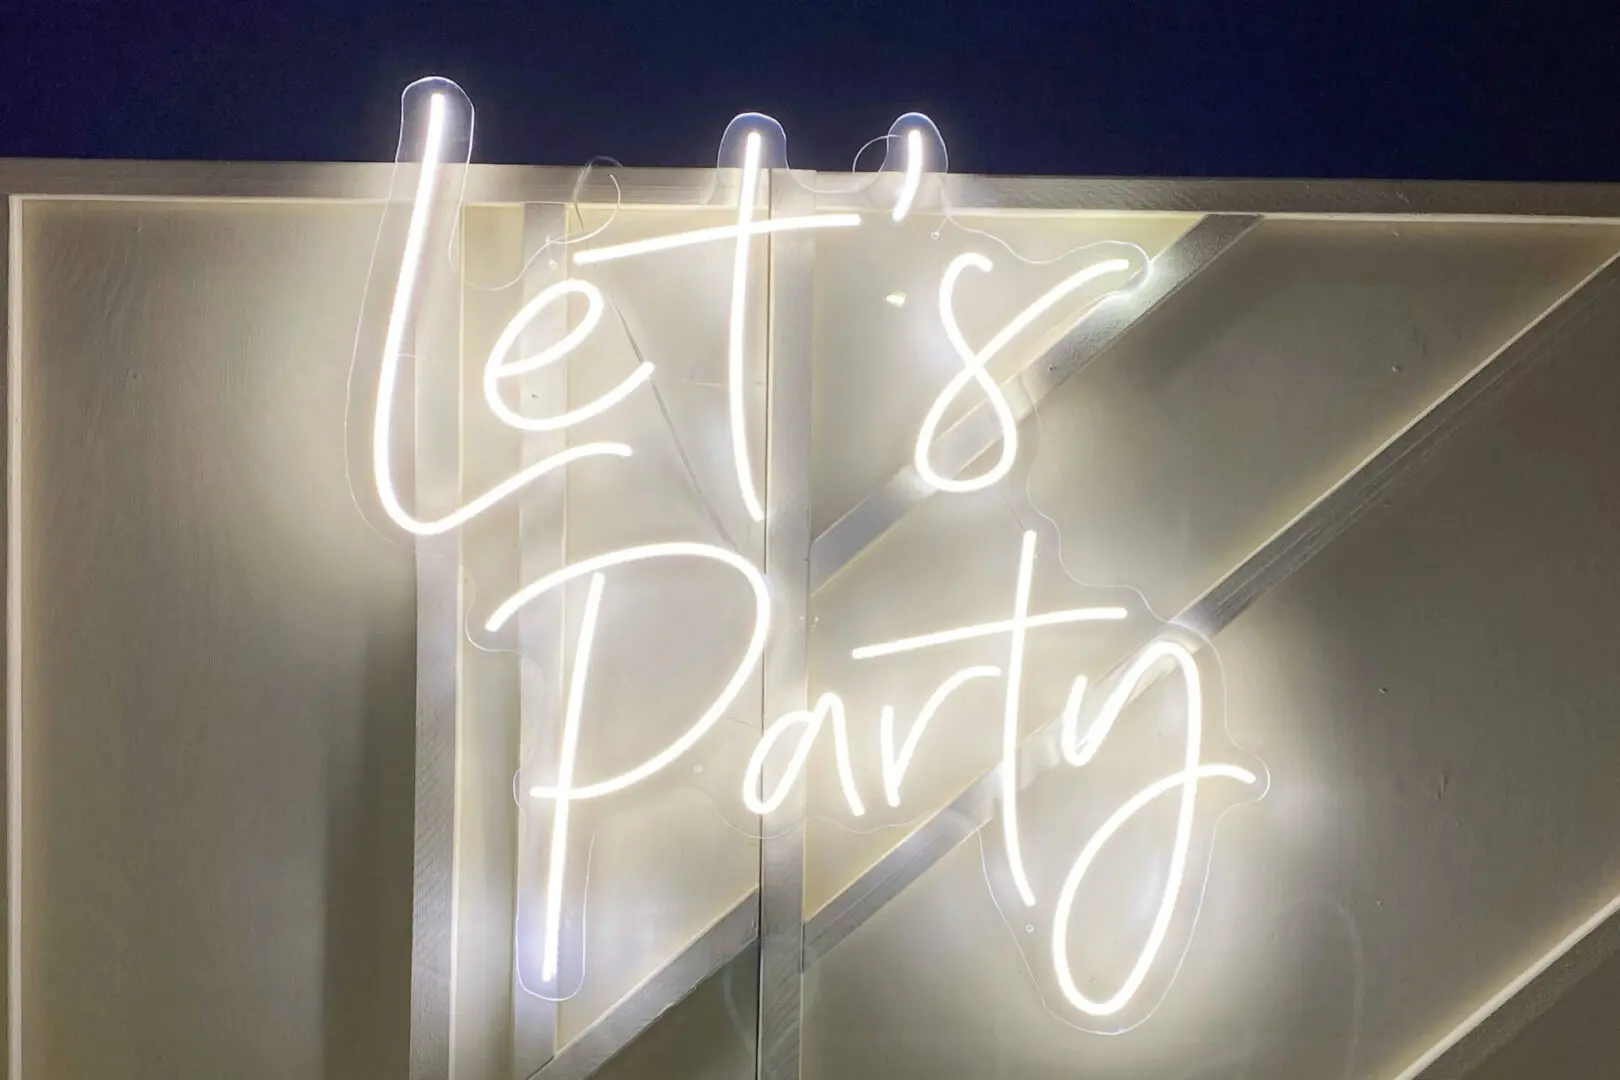 Lets Party Neon Sign on a Metallic Wall